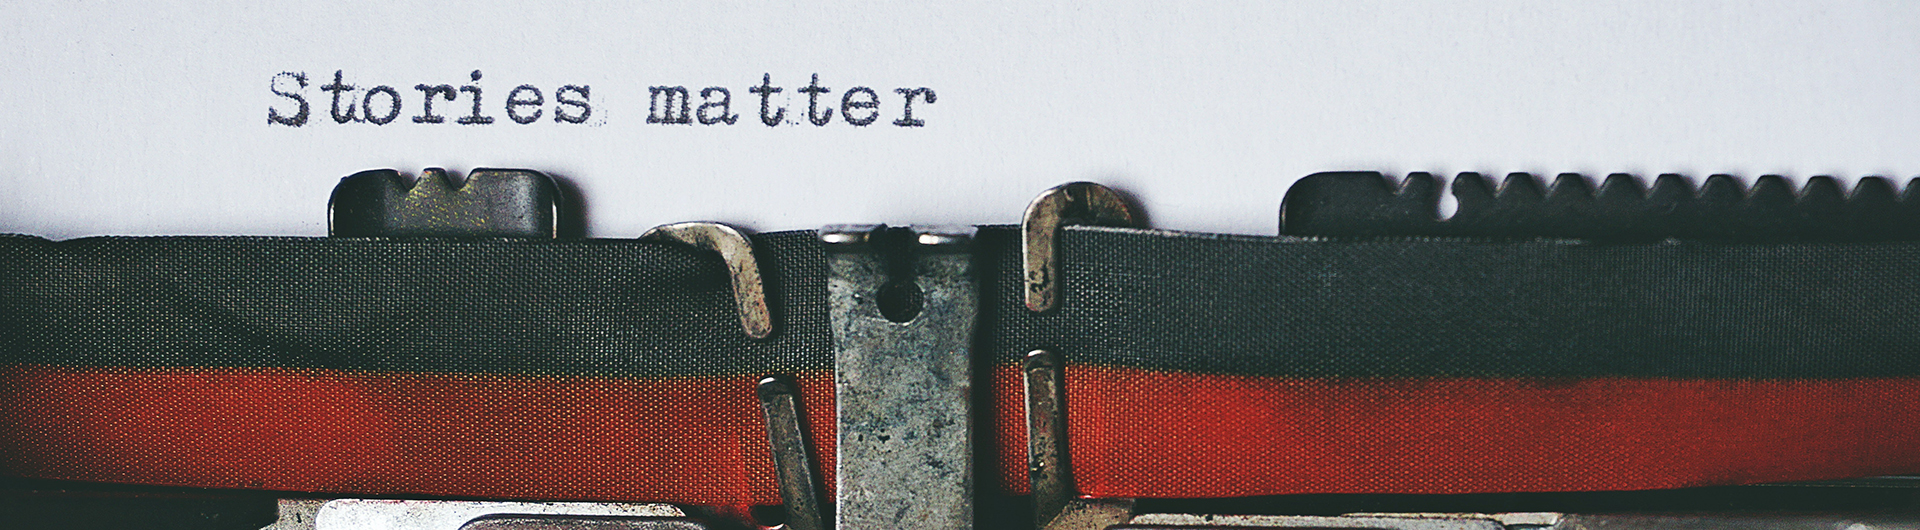 "Stories matter" freshly typed on white paper above a typewriter ribbon